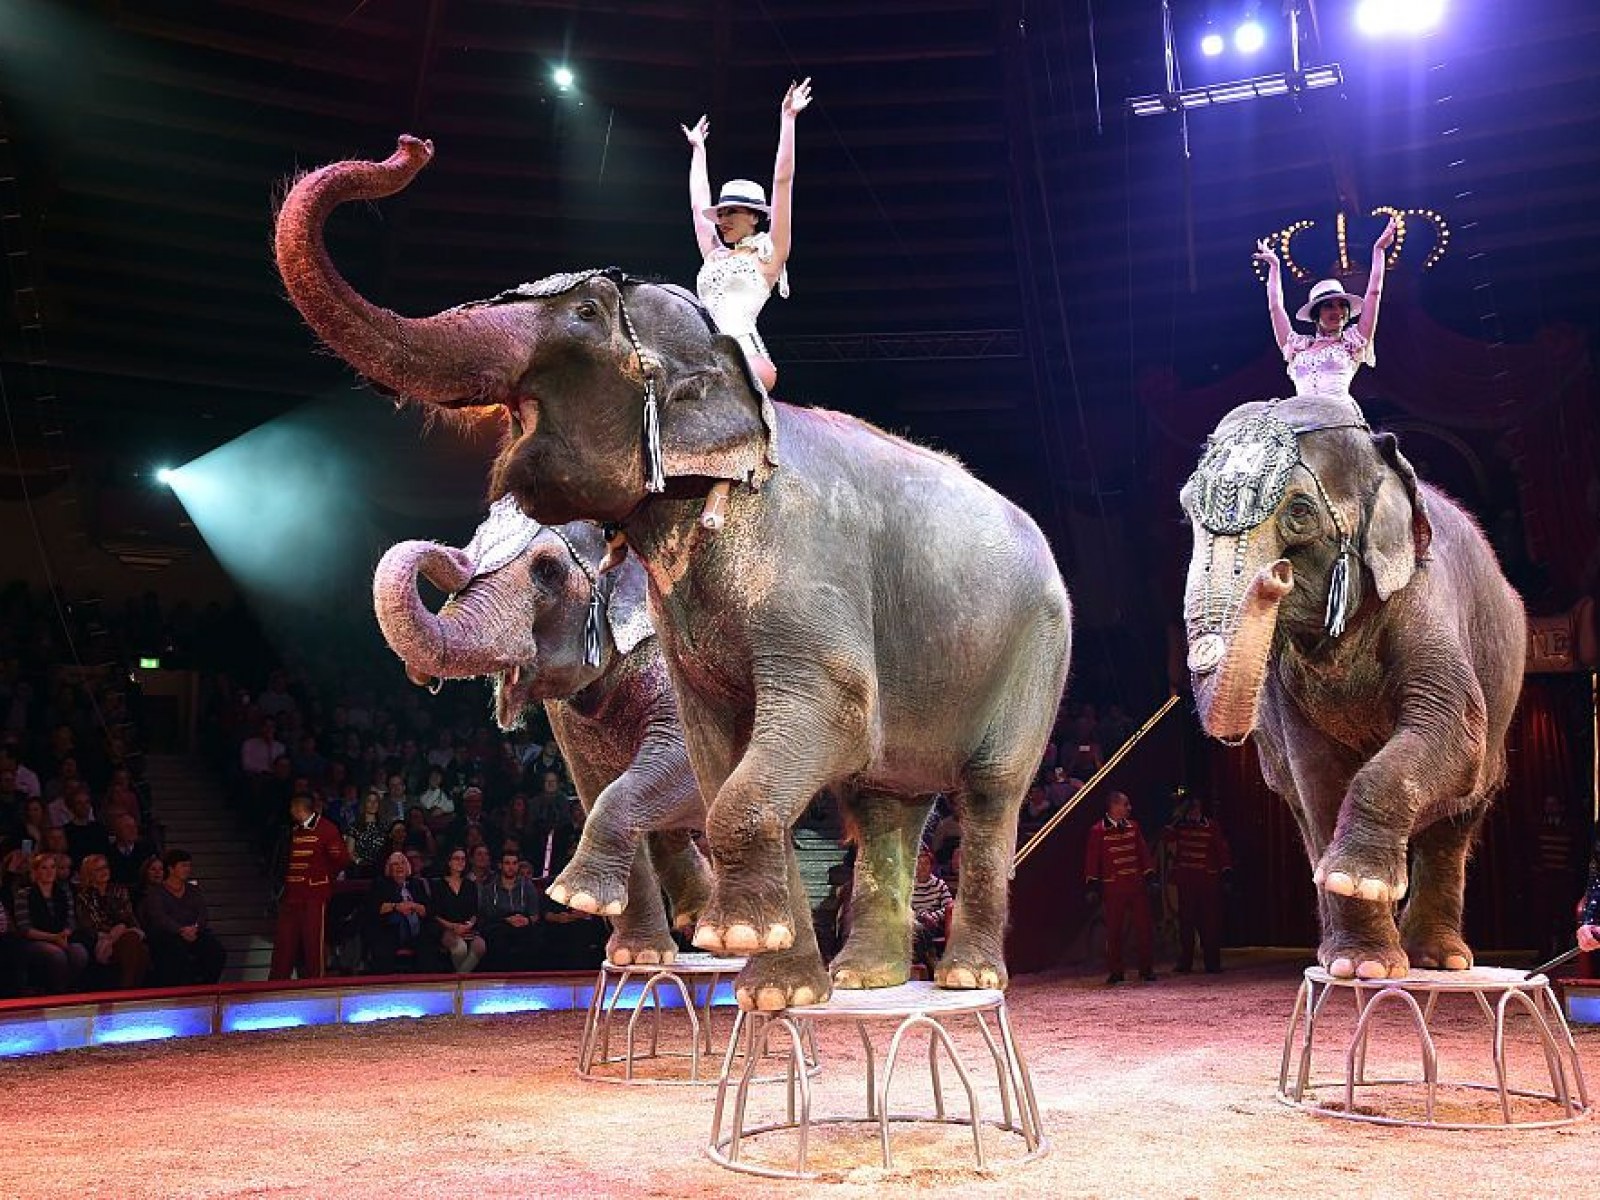 Elephants Used in a Circus